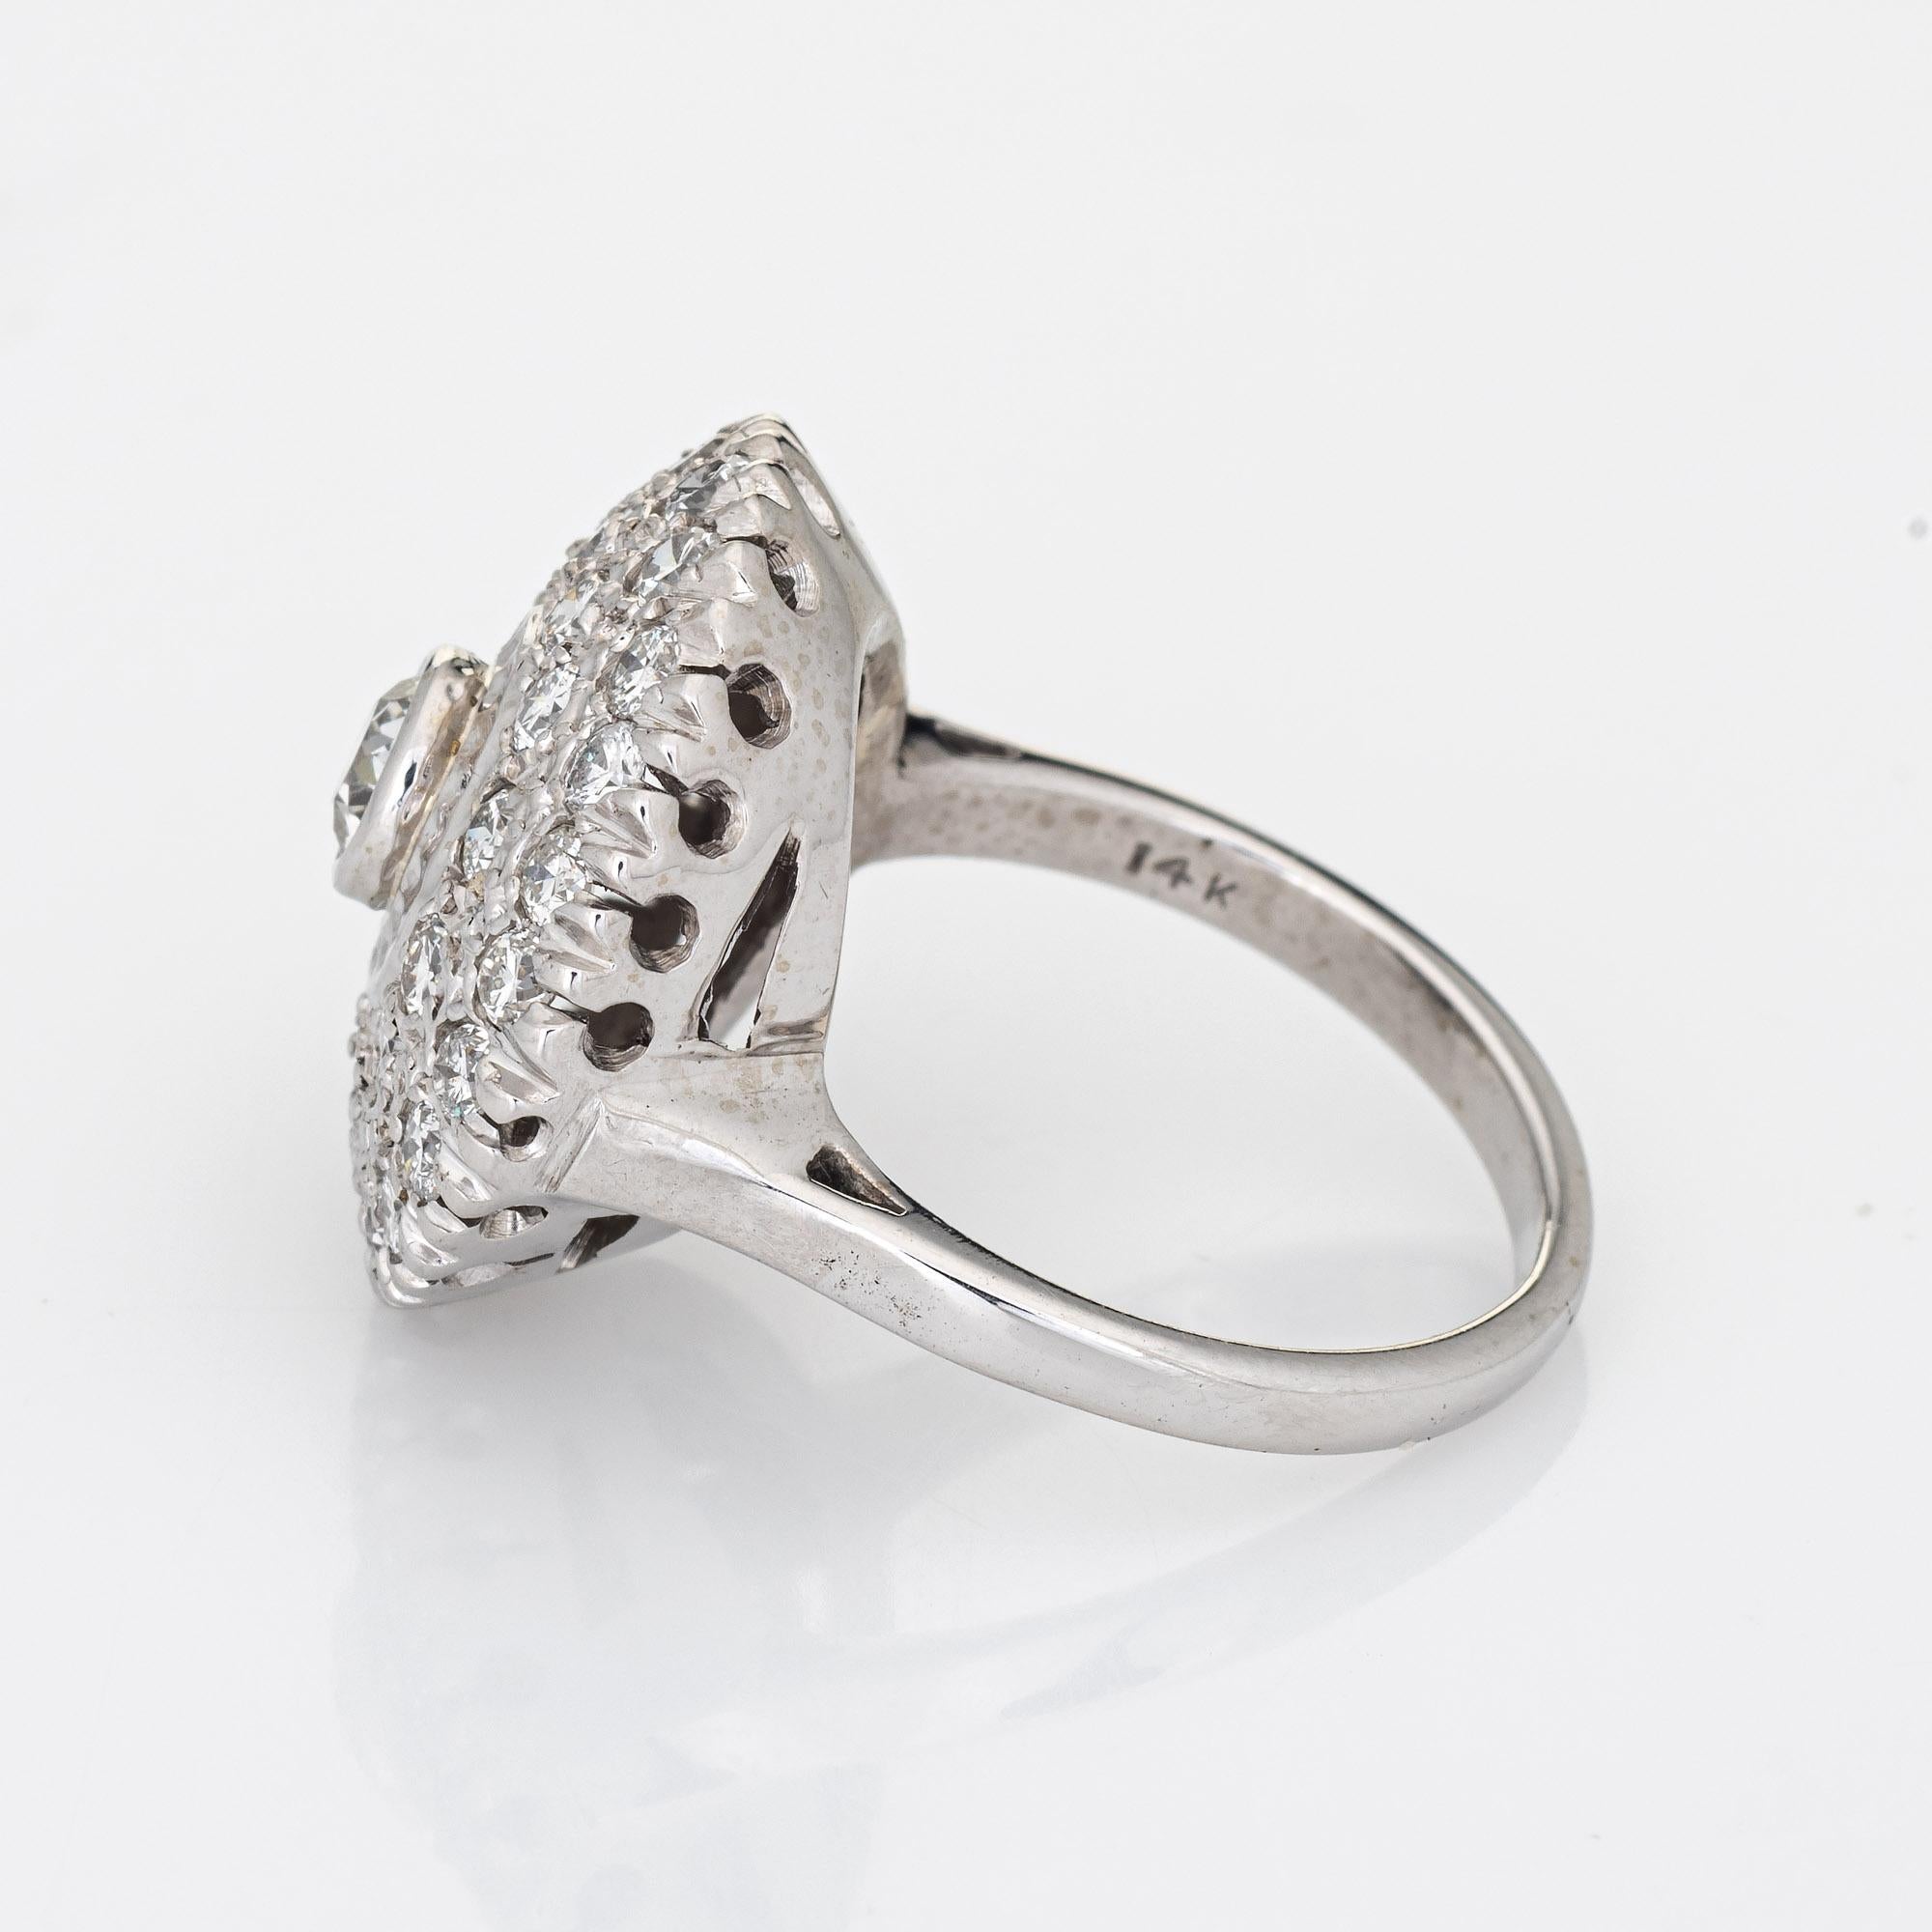 Old European Cut Vintage Diamond Cluster Ring 14k White Gold Round Cocktail Fine Jewelry For Sale